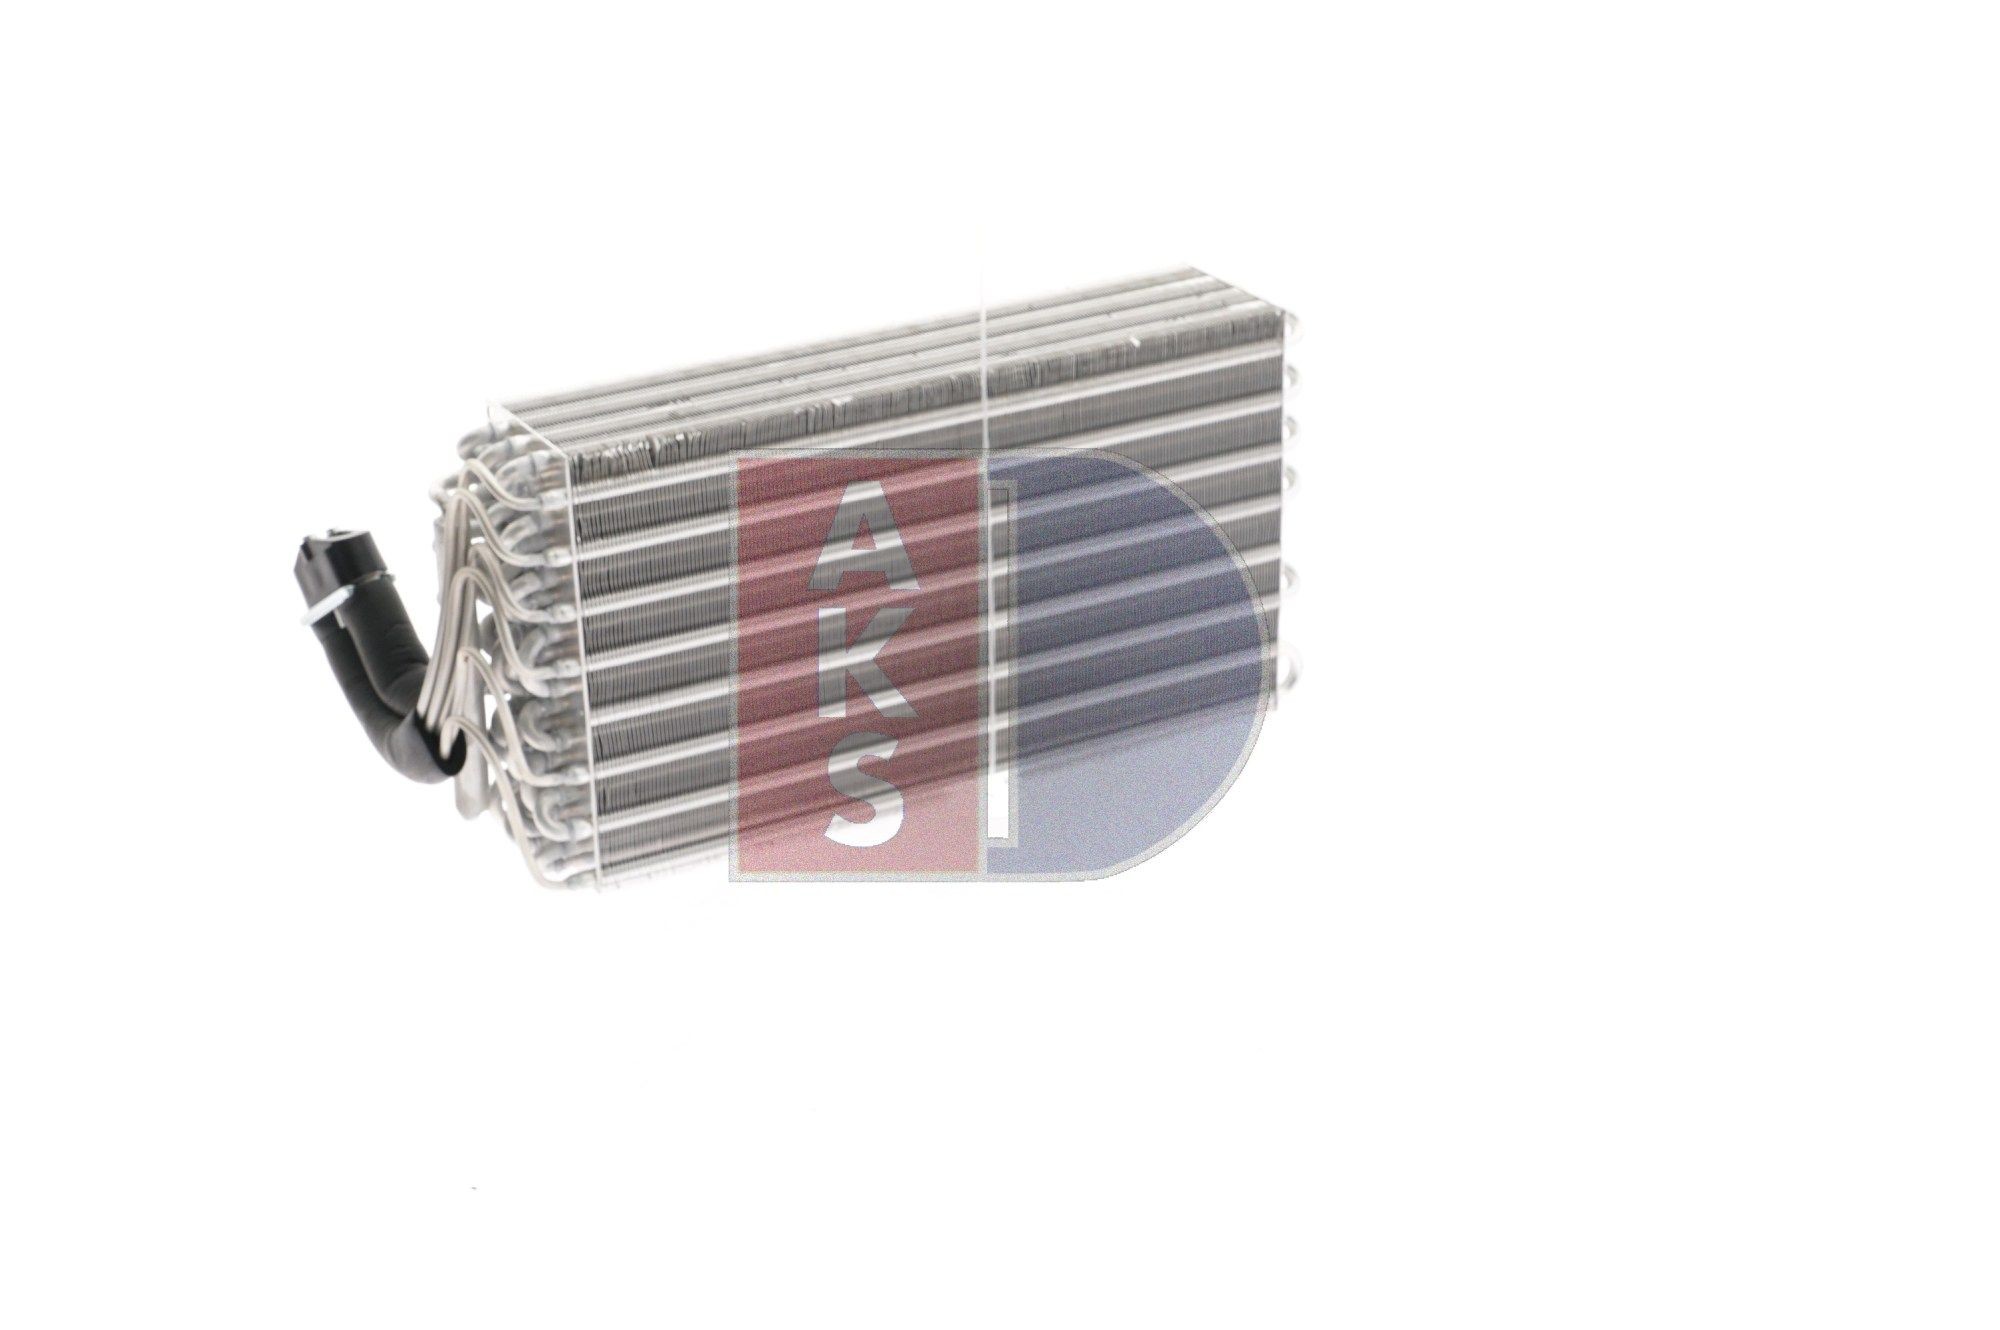 Air conditioning evaporator 820510N from AKS DASIS